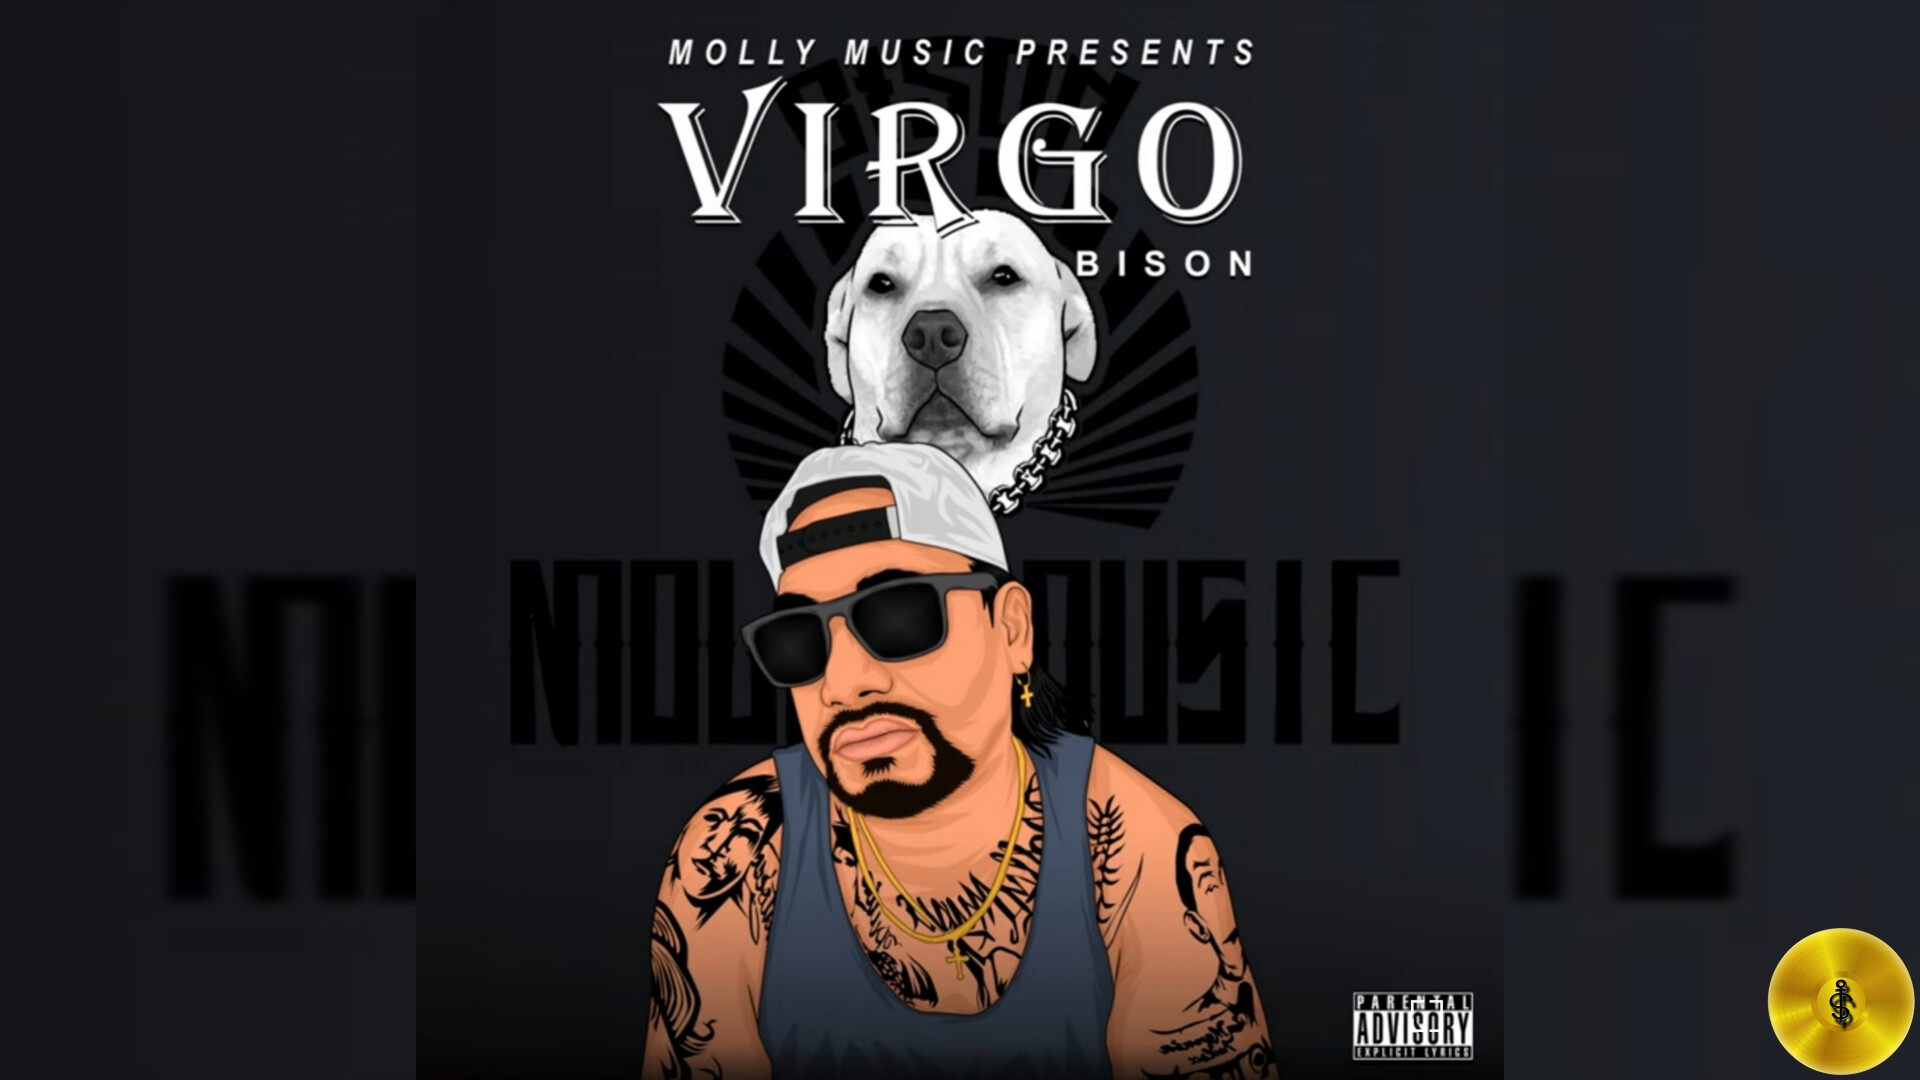 Bison proves to be a rare breed w/ ‘Virgo’ EP